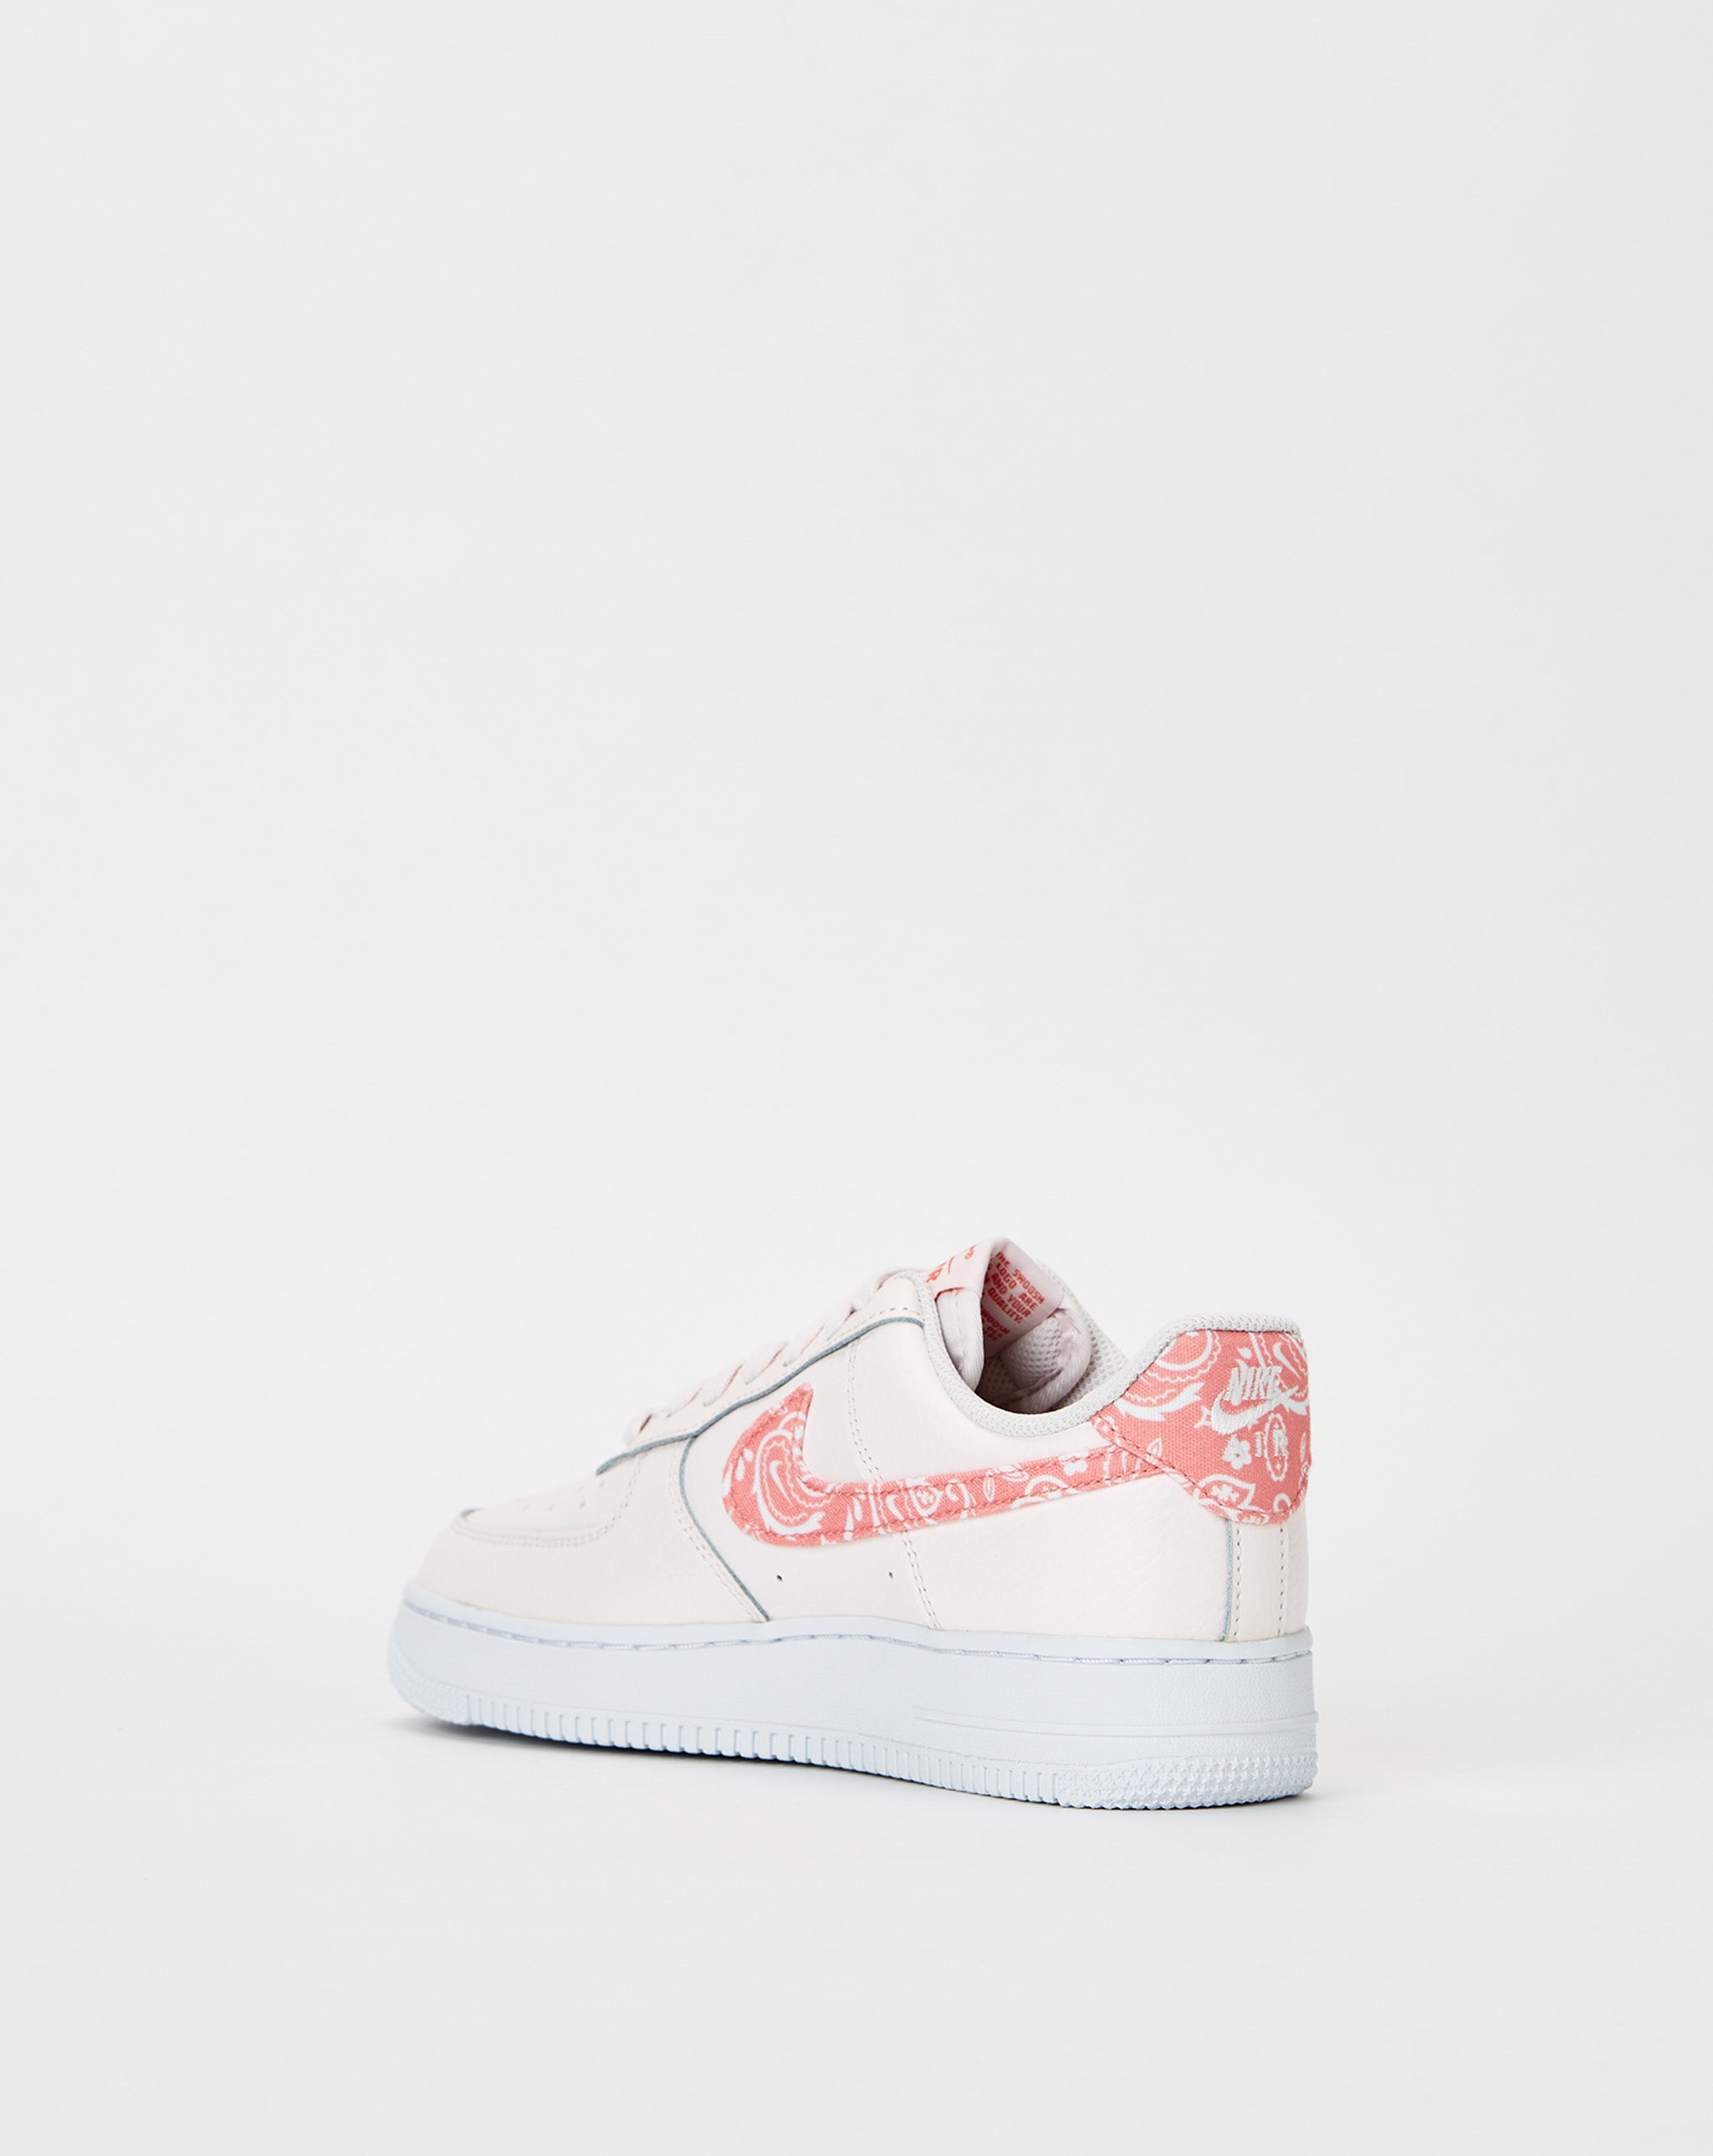 nike air force 1 low white photon dust black chile red da8482 100 release date